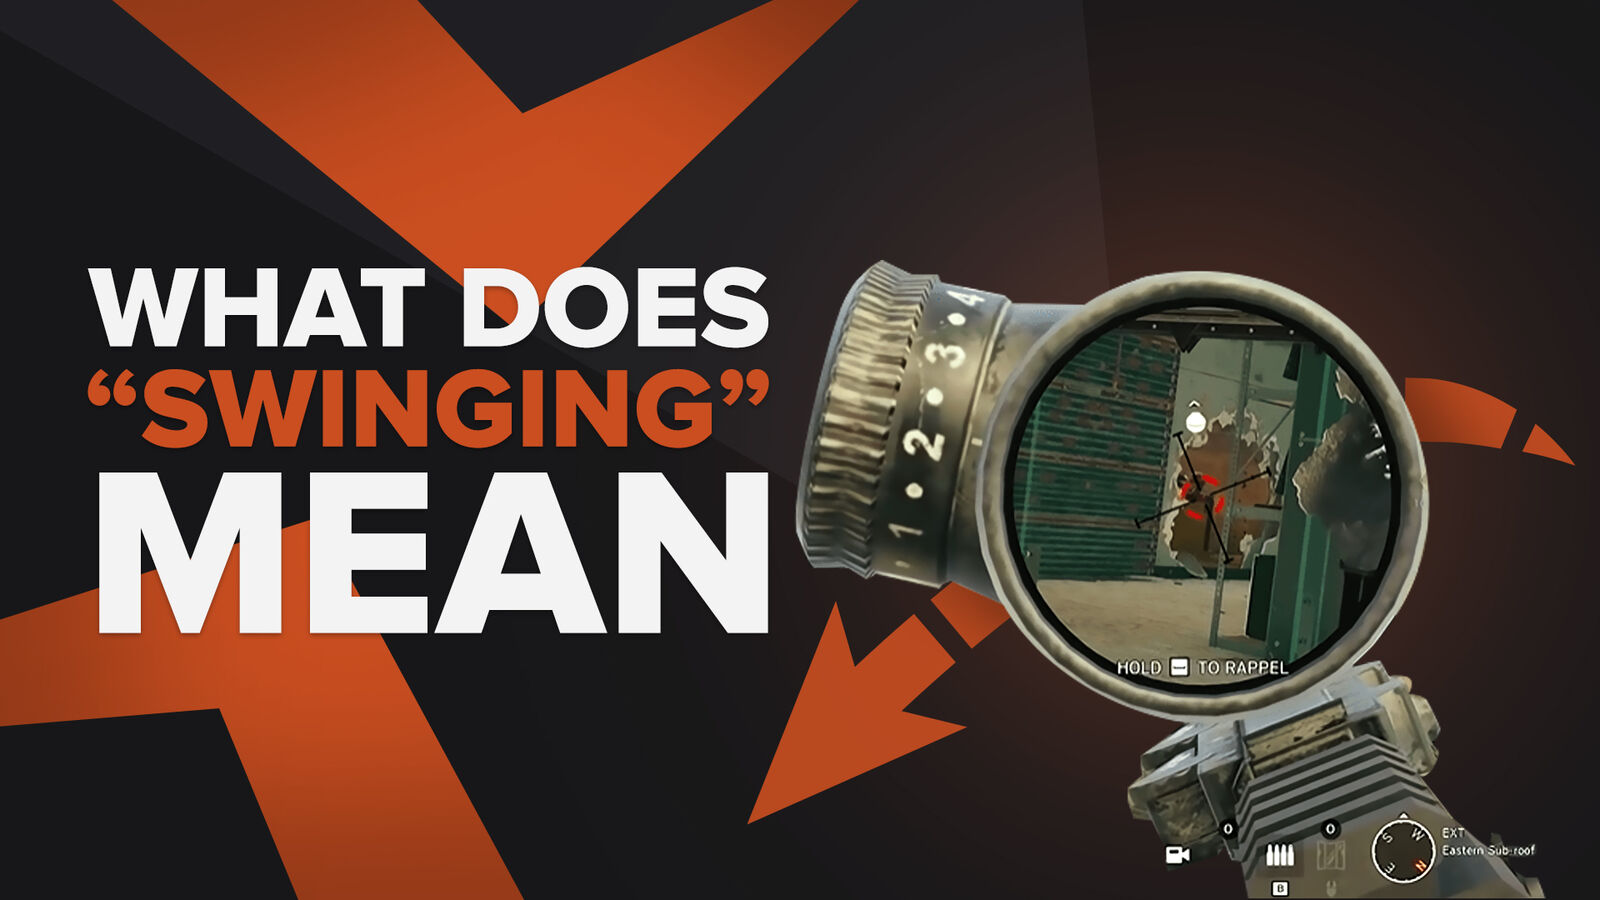 What Does “Swinging” Mean in Rainbow Six: Siege?